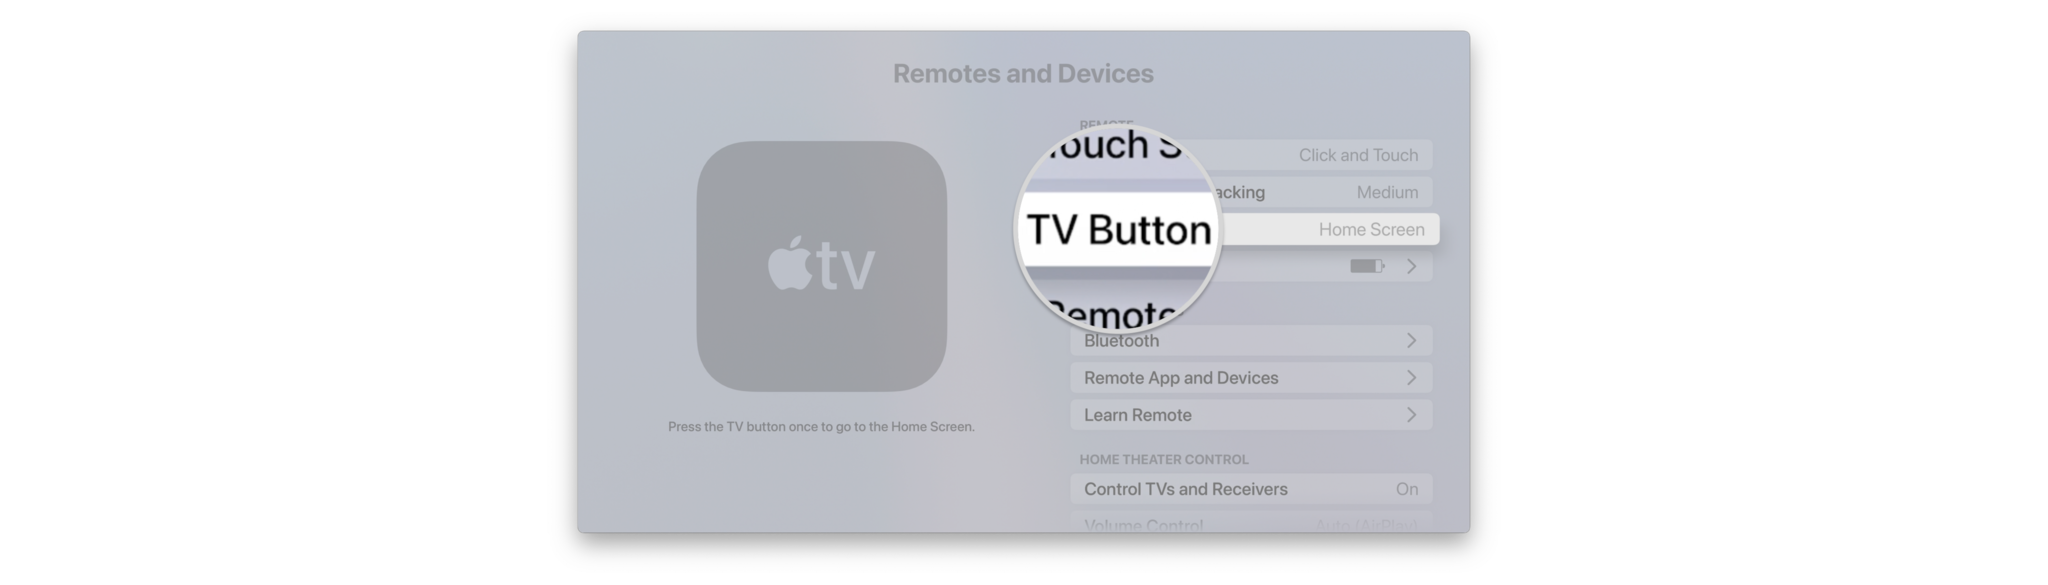 How to add shows and movies to Up Next in the Apple TV app on Apple TV by showing steps: Click TV Button to assign an action